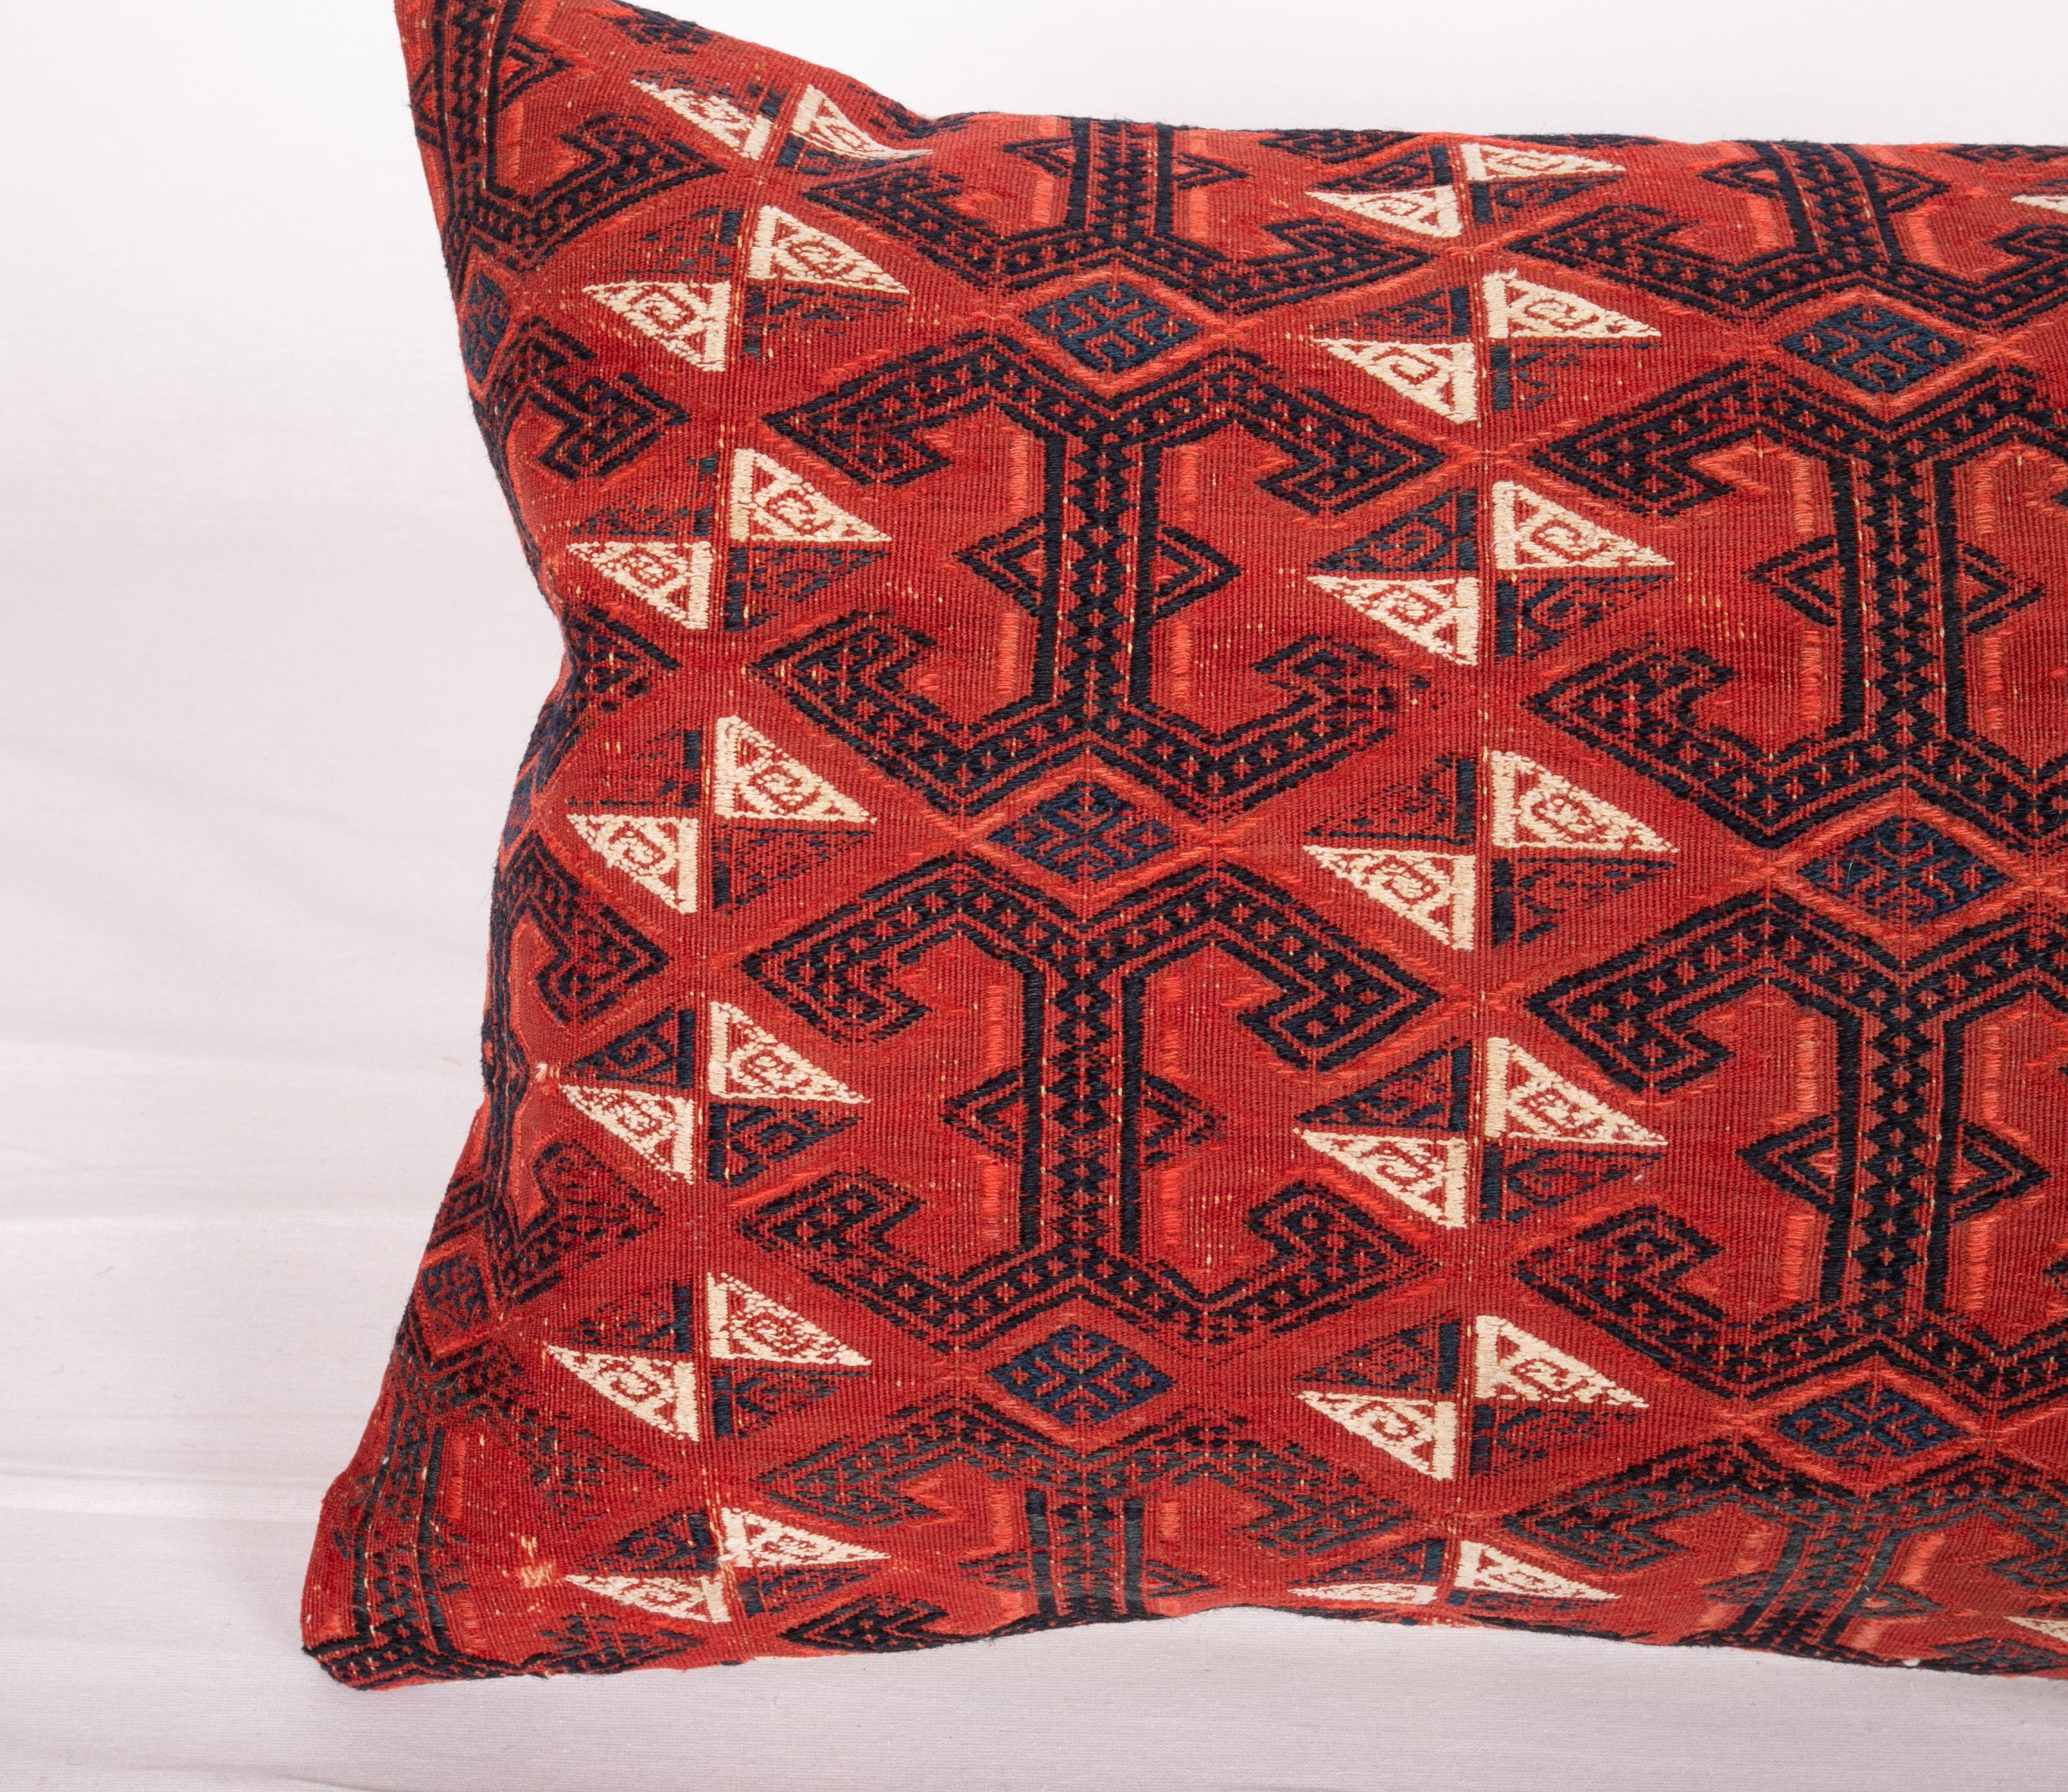 Hand-Woven Antique Turkmen Cicim Pillow Made from a 19th Century Turkmen Tekke Tribe Kilim For Sale